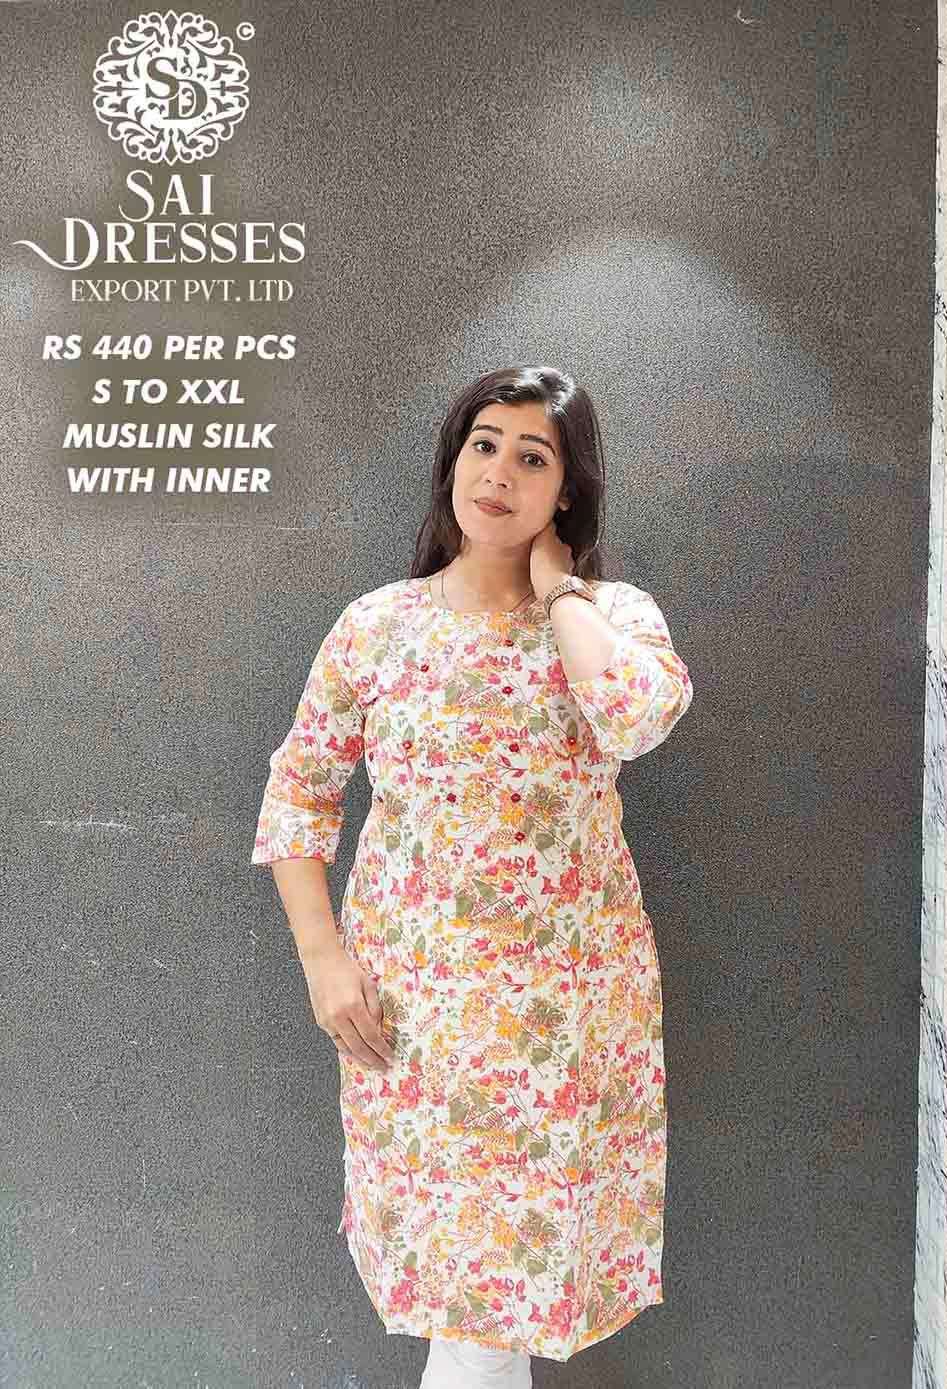 SAI DRESSES PRESENT D.NO SD53 READY TO WEAR DIGITAL PRINTED KURTI COMBO COLLECTION IN WHOLESALE RATE IN SURAT